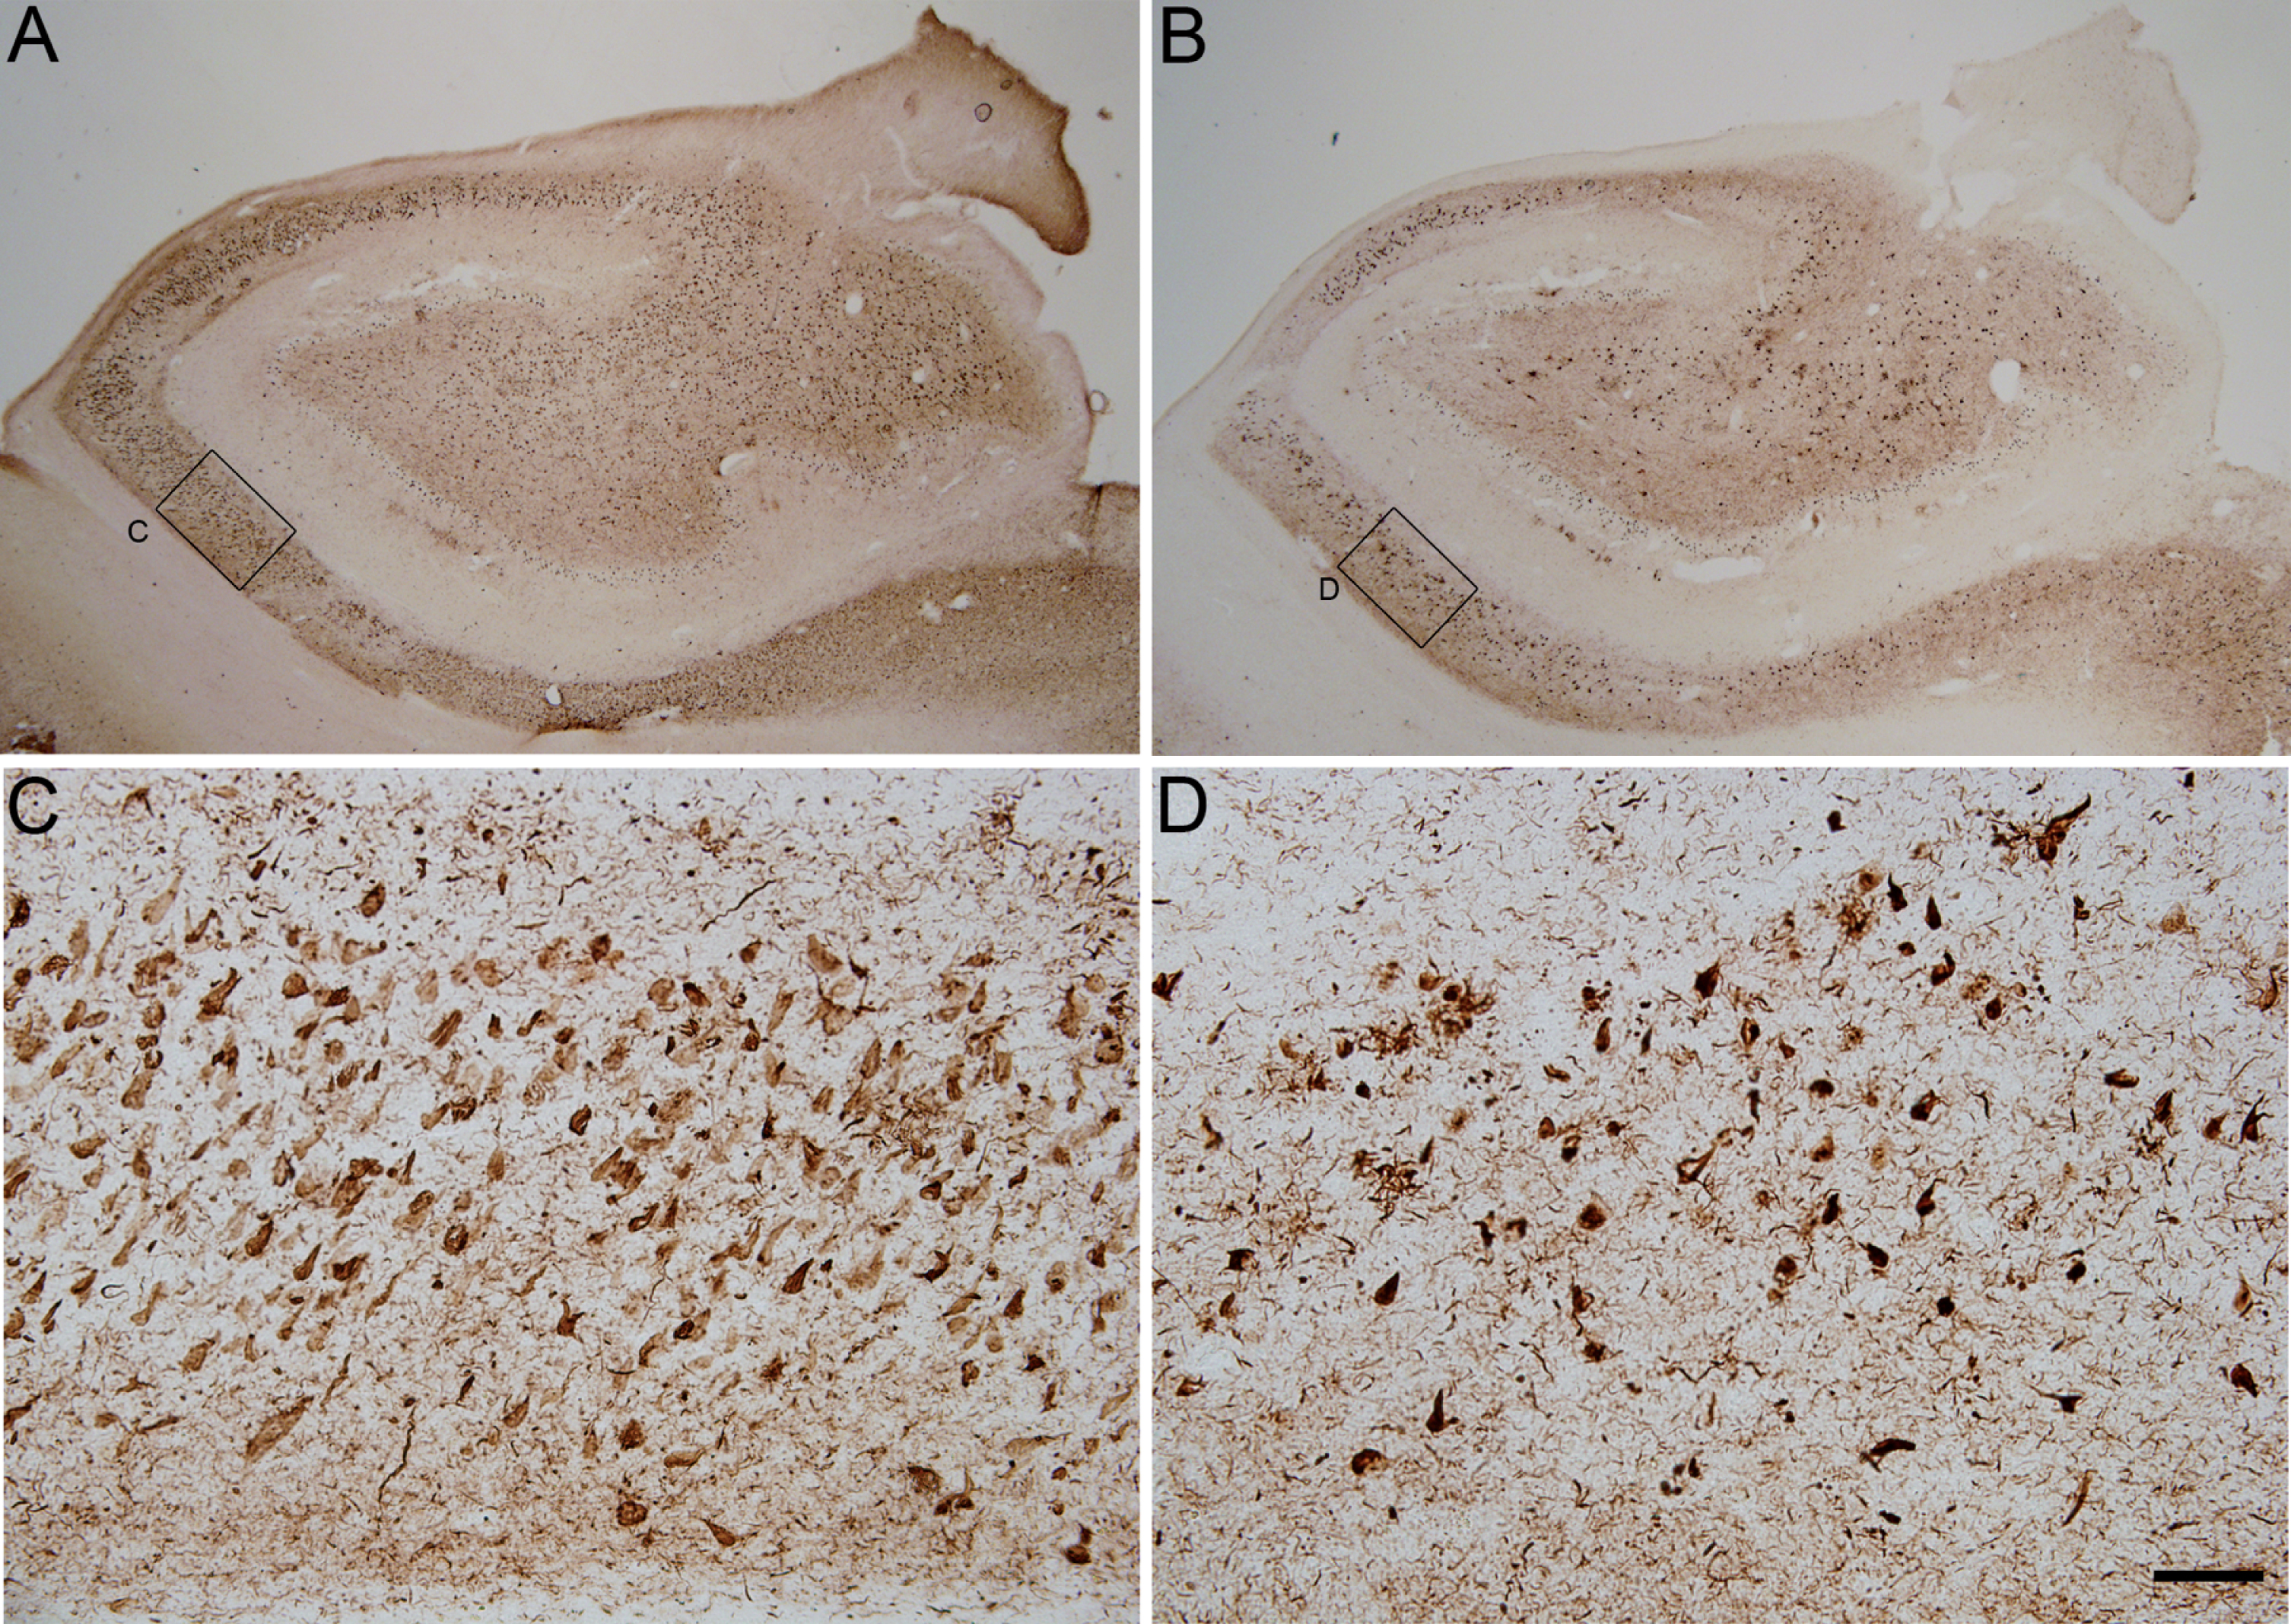 Photomicrographs showing the pattern of hyperphosphorylated tau immunostaining using pS396 (A and C) and AT100 (B and D) antibodies in two adjacent coronal sections from the hippocampus of an AD case (BCN4). Small squared zones in A and B are shown at higher magnification in C–D (CA1 field of the hippocampus). Scale bar shown in D indicates 1824 μm in A–B and 114 μm in C–D.